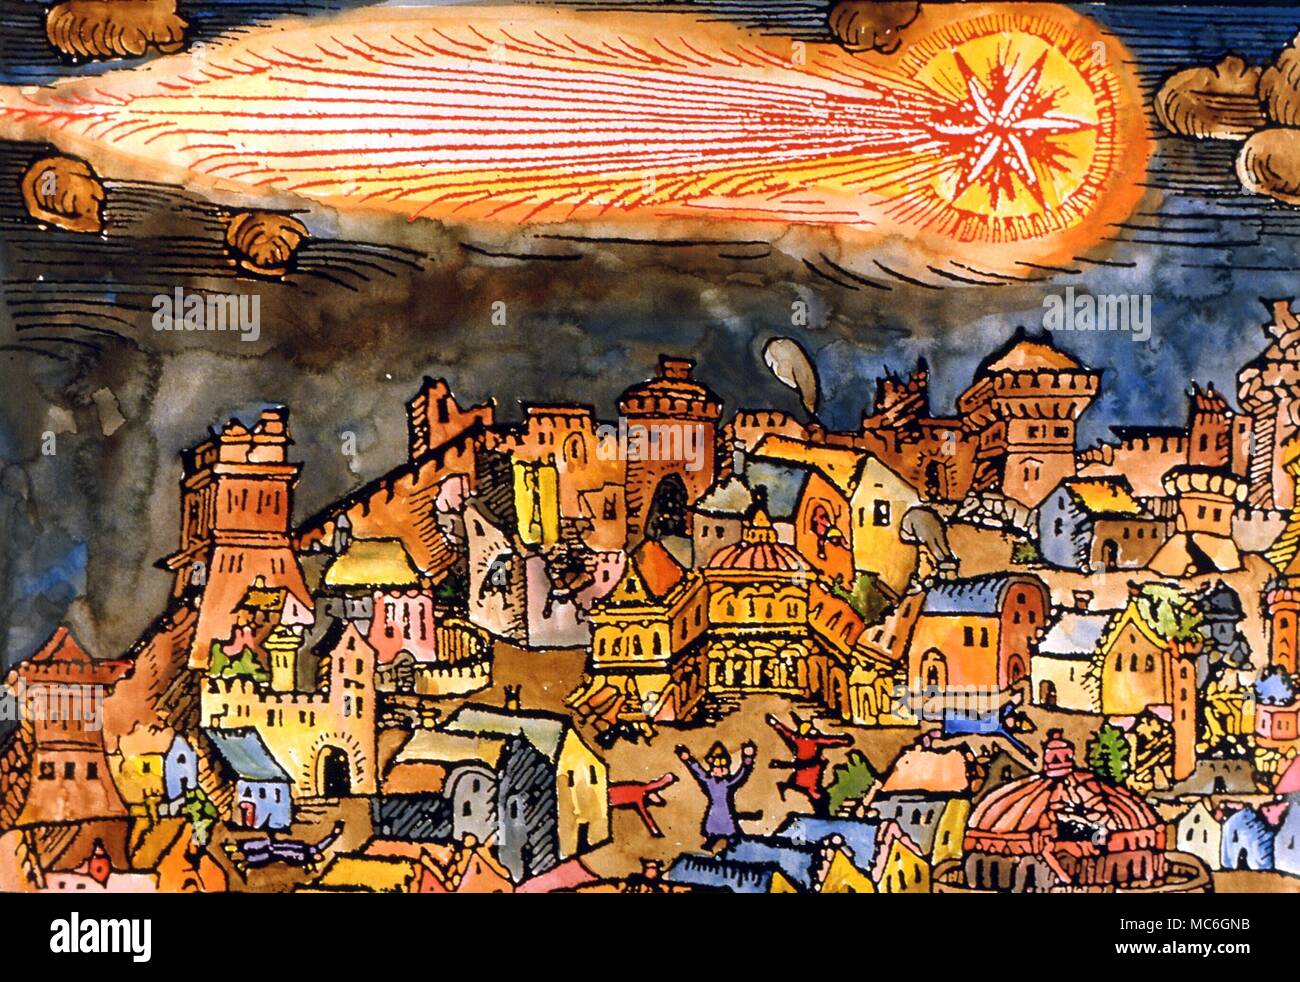 COMETS AND METEORS - German broadsheet of circa 1540 depicting the giant comet terrifying people as it swoops over a mediaeval city. Private collection Stock Photo